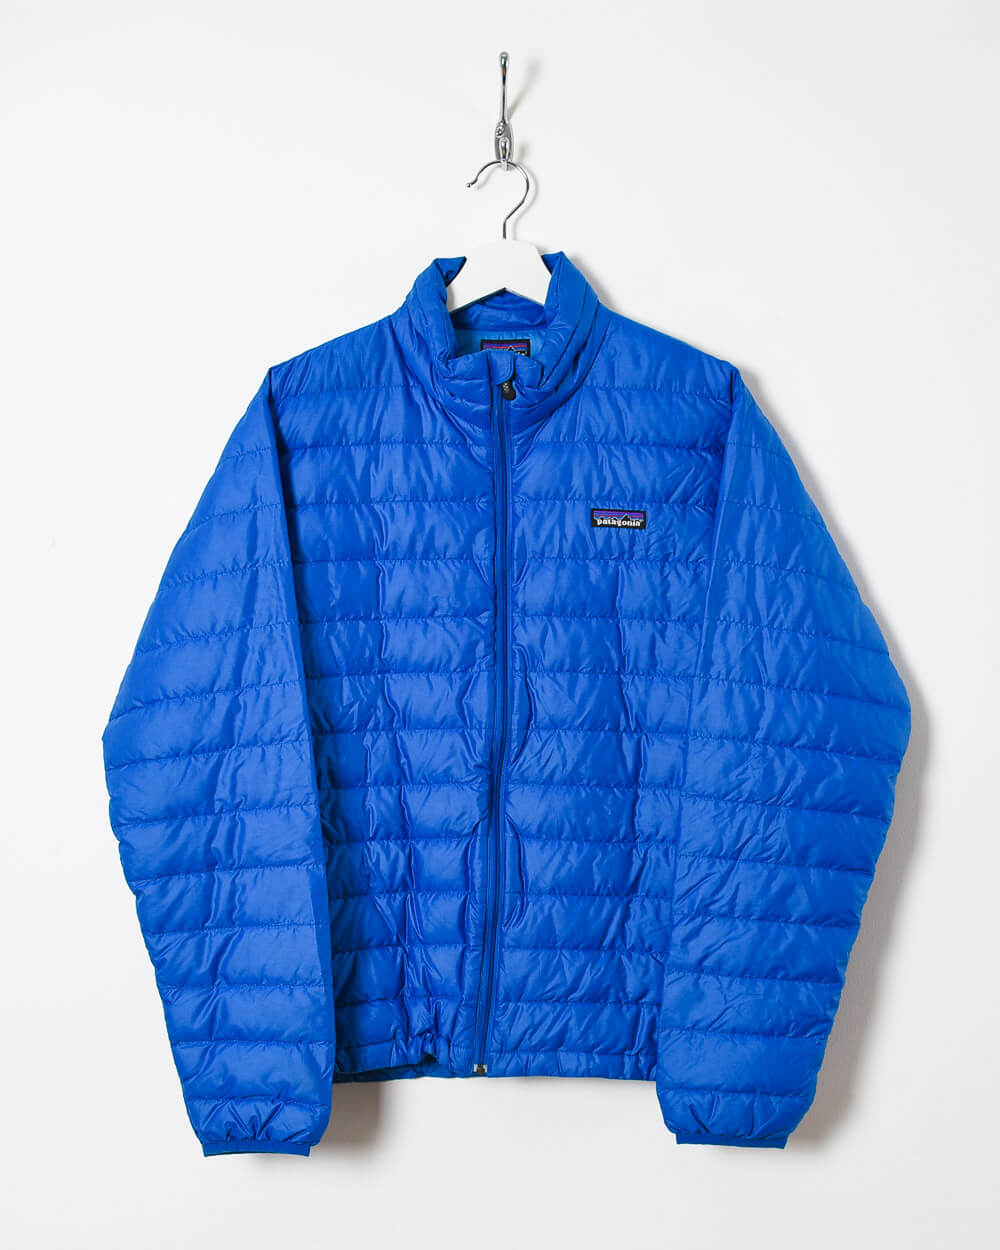 Patagonia Puffer Jacket - Small - Domno Vintage 90s, 80s, 00s Retro and Vintage Clothing 